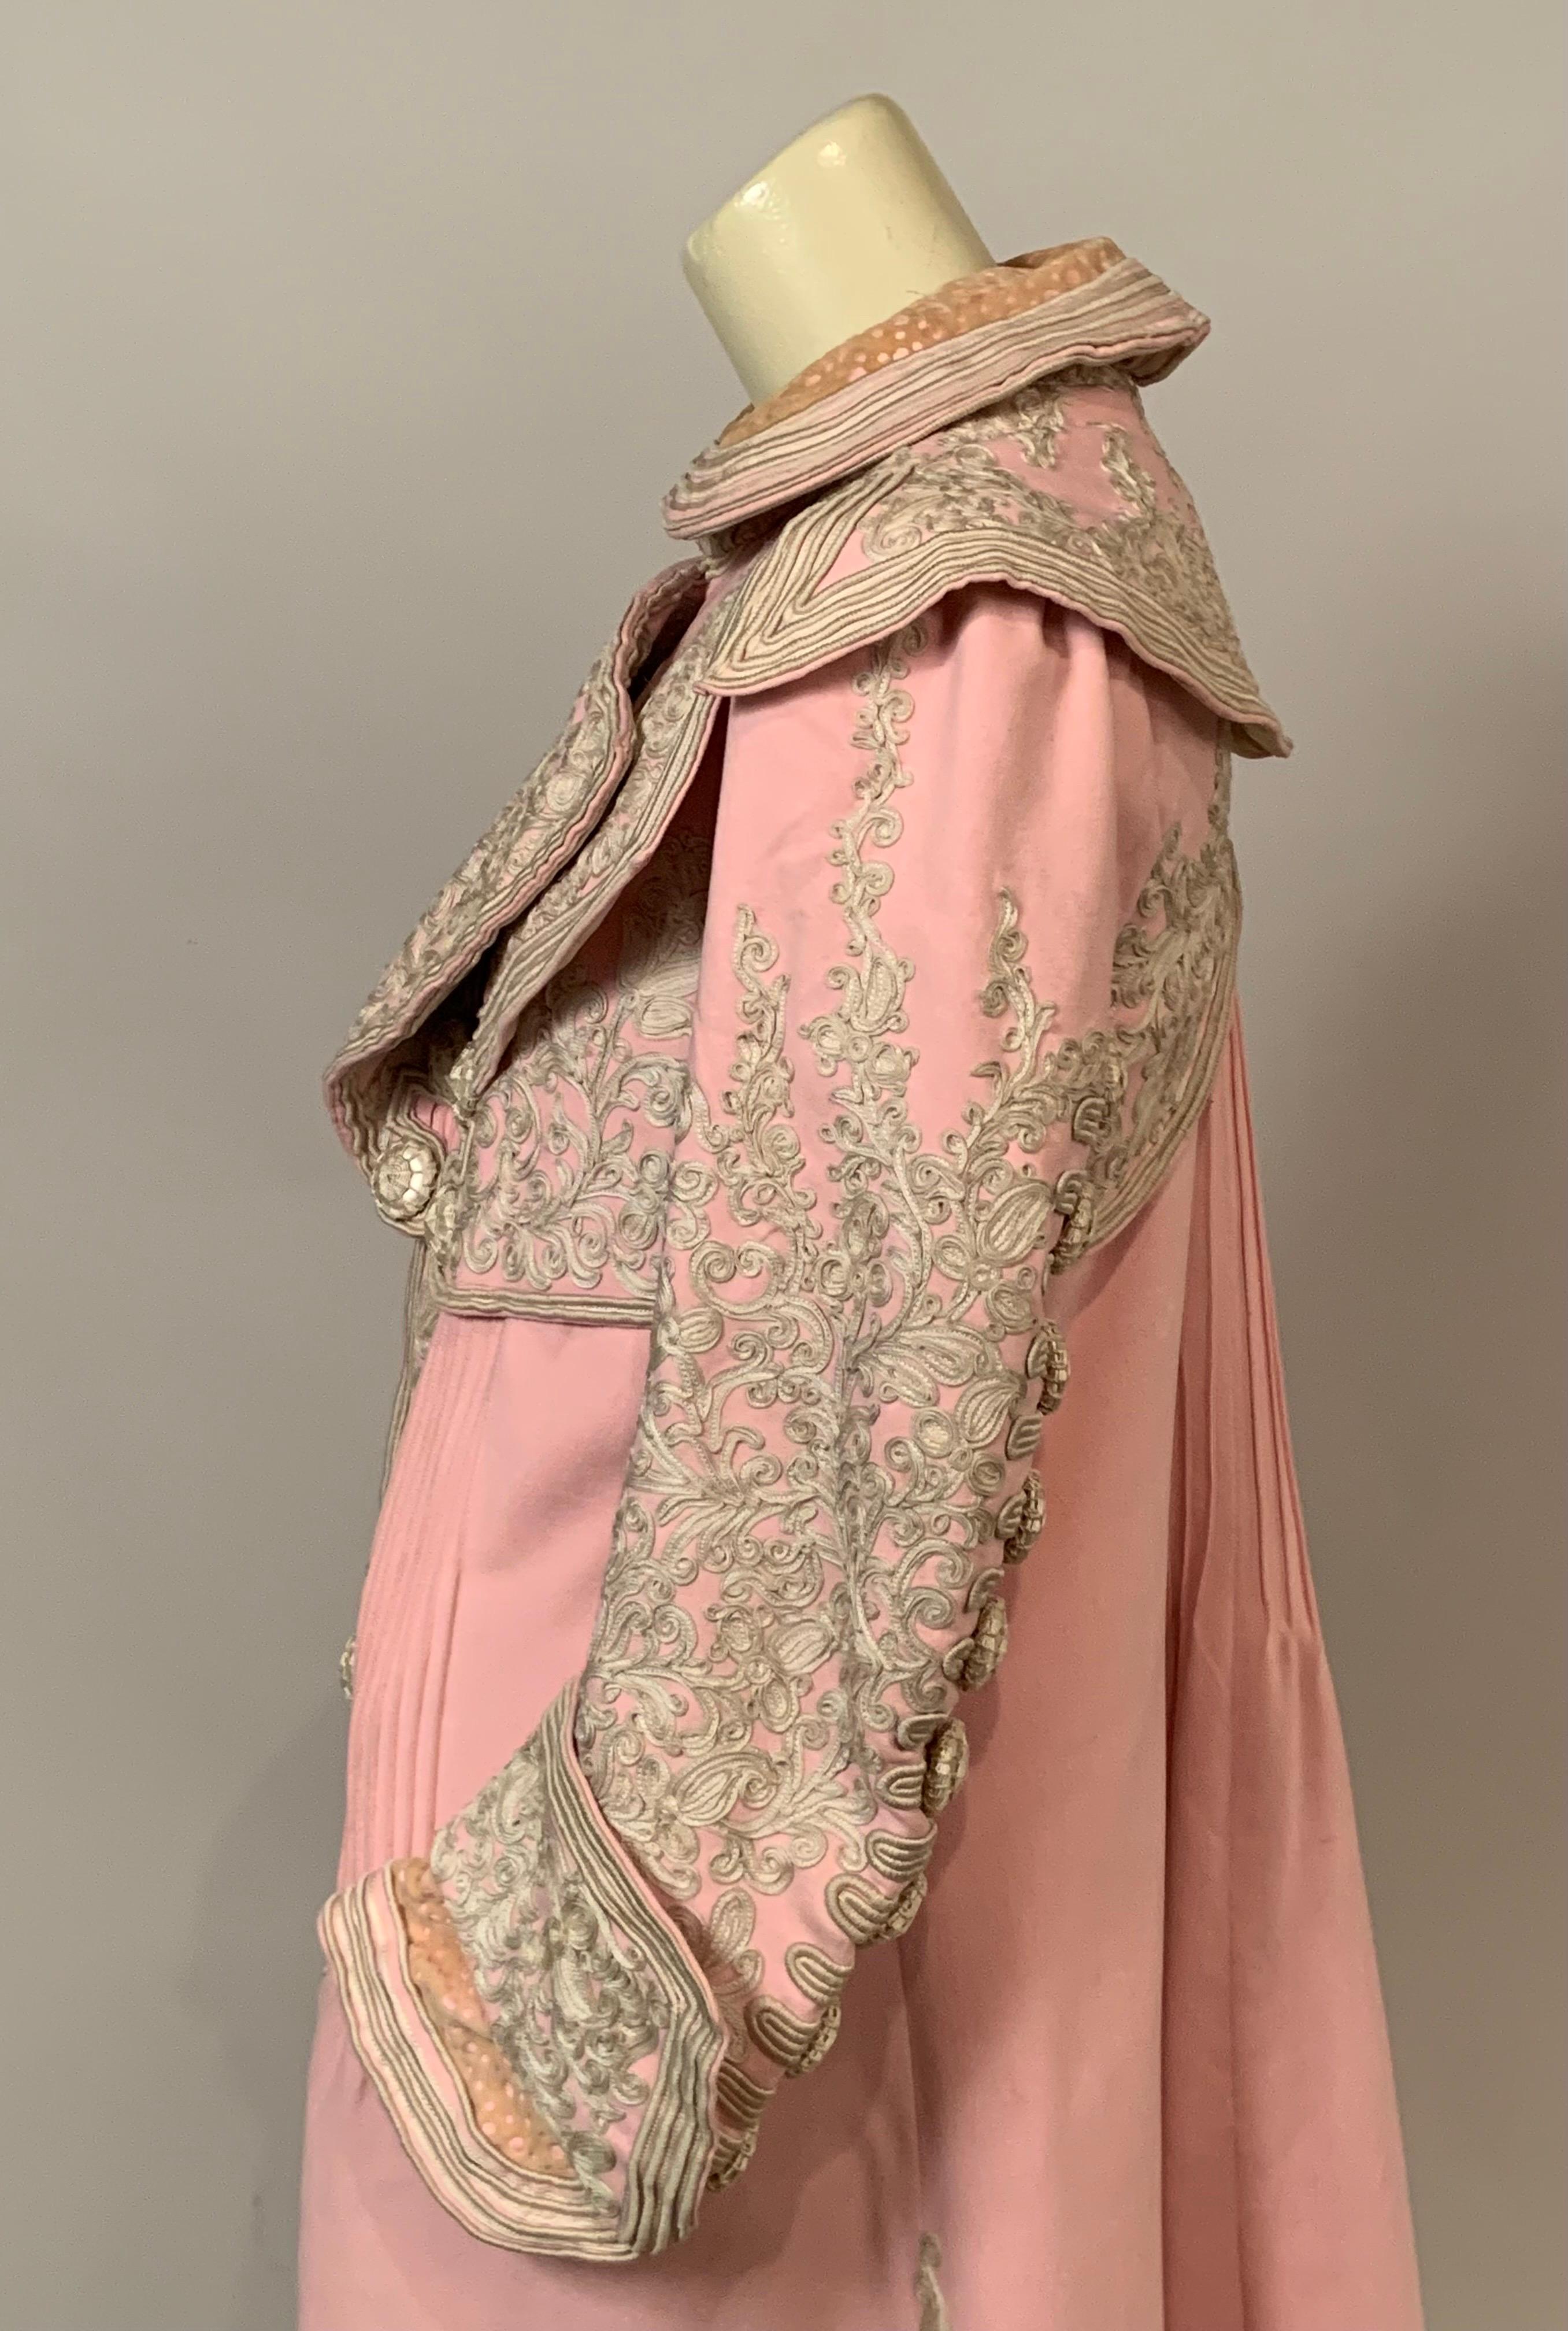 Bright Pink Wool Coat with Elaborate Ribbon Work and Button Trim Circa 1900 3